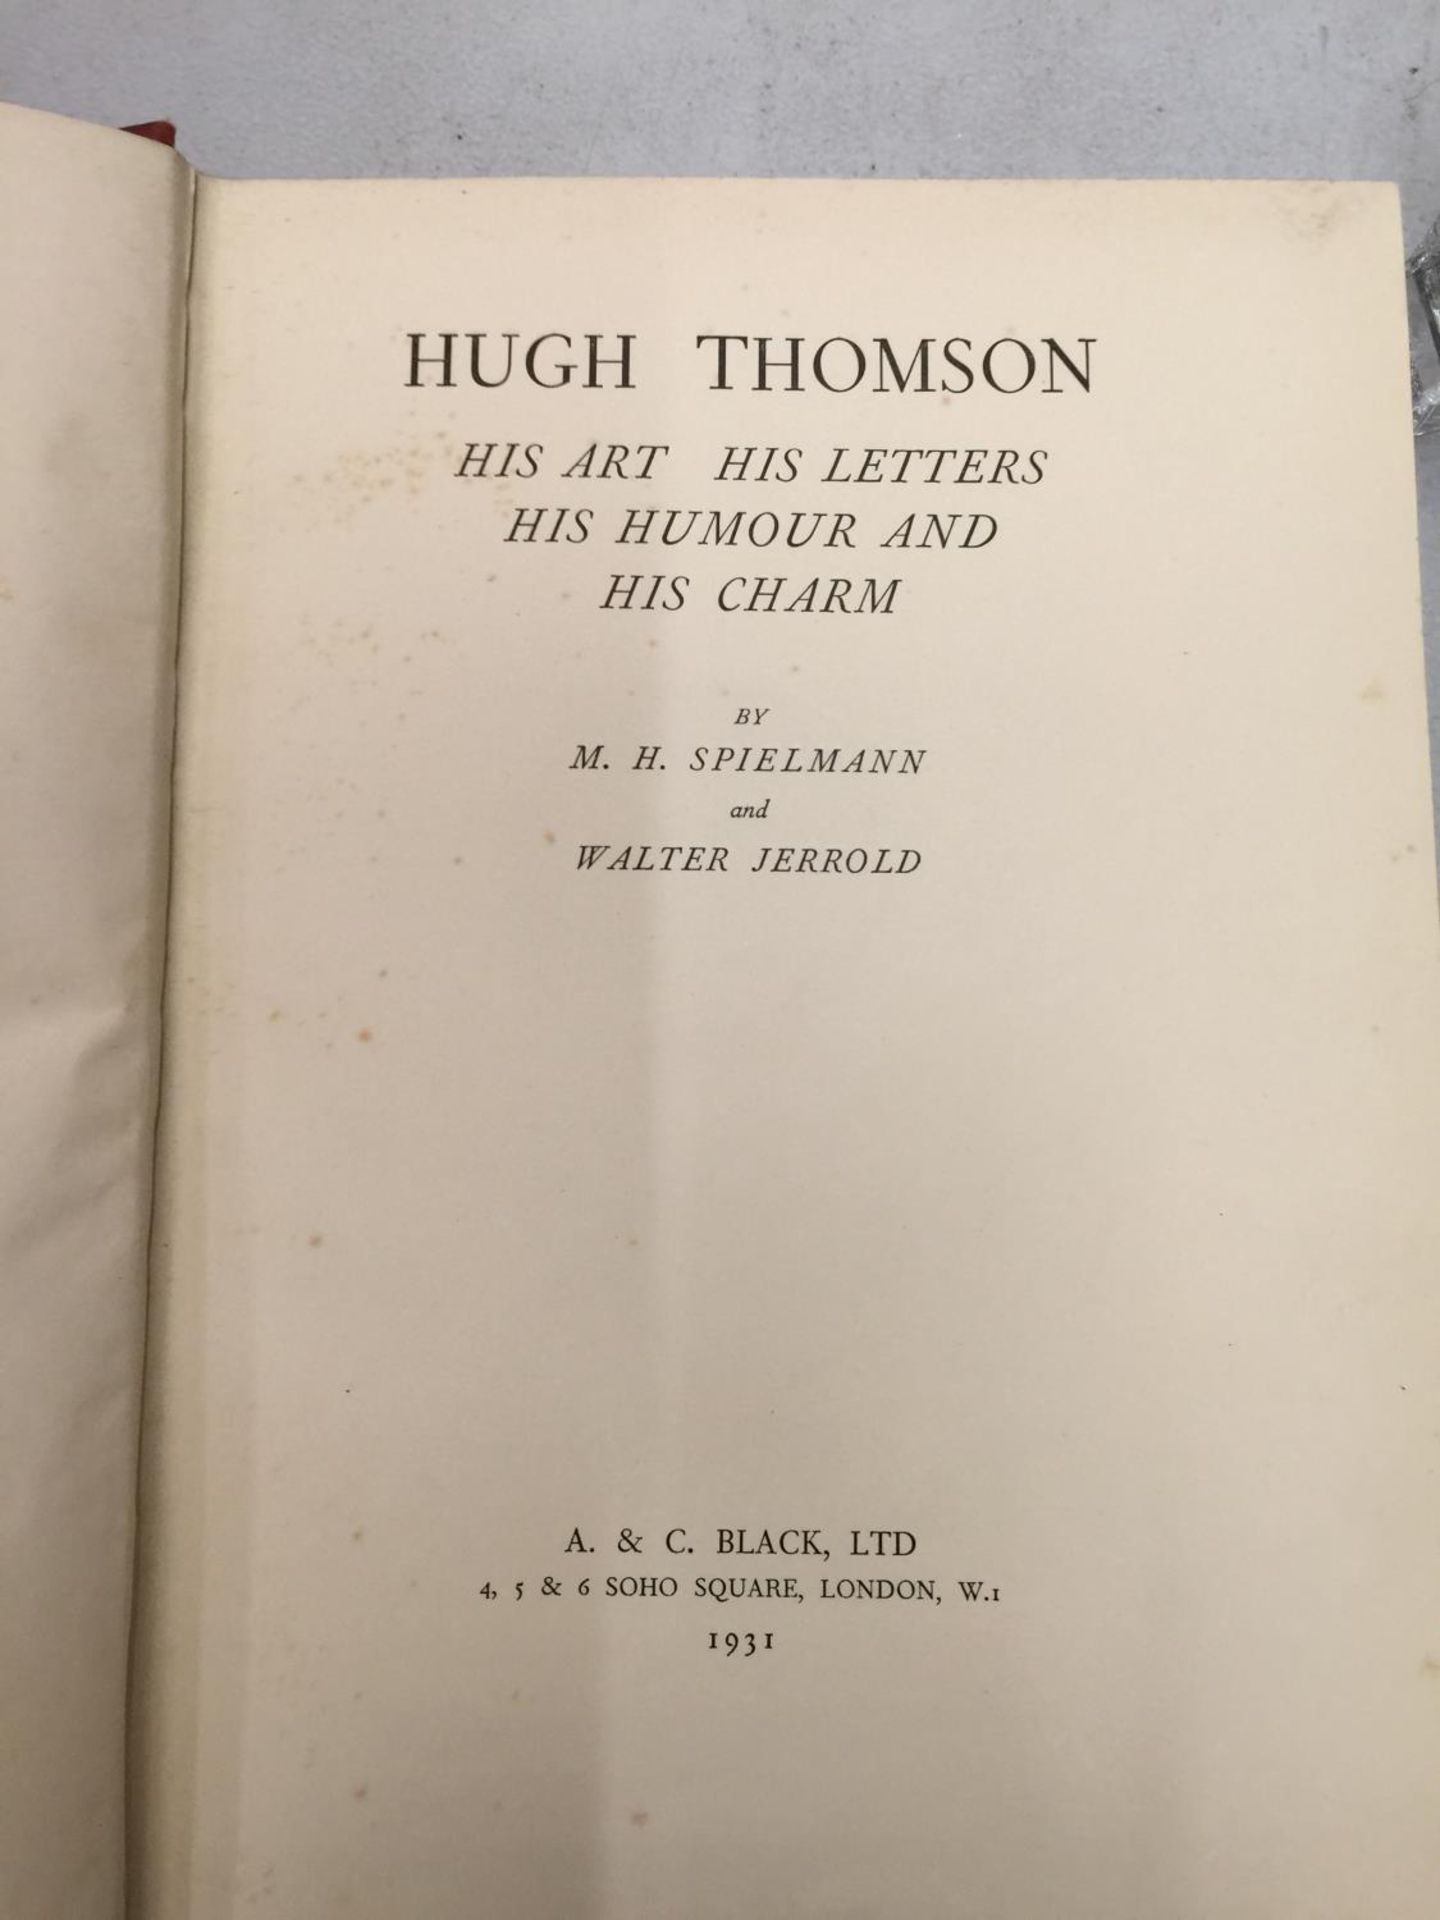 A 1931 EDITION HARDBACK EDITION OF HUGH THOMPSON, HIS ART, HIS LETTERS AND HIS CHARM - Image 2 of 3